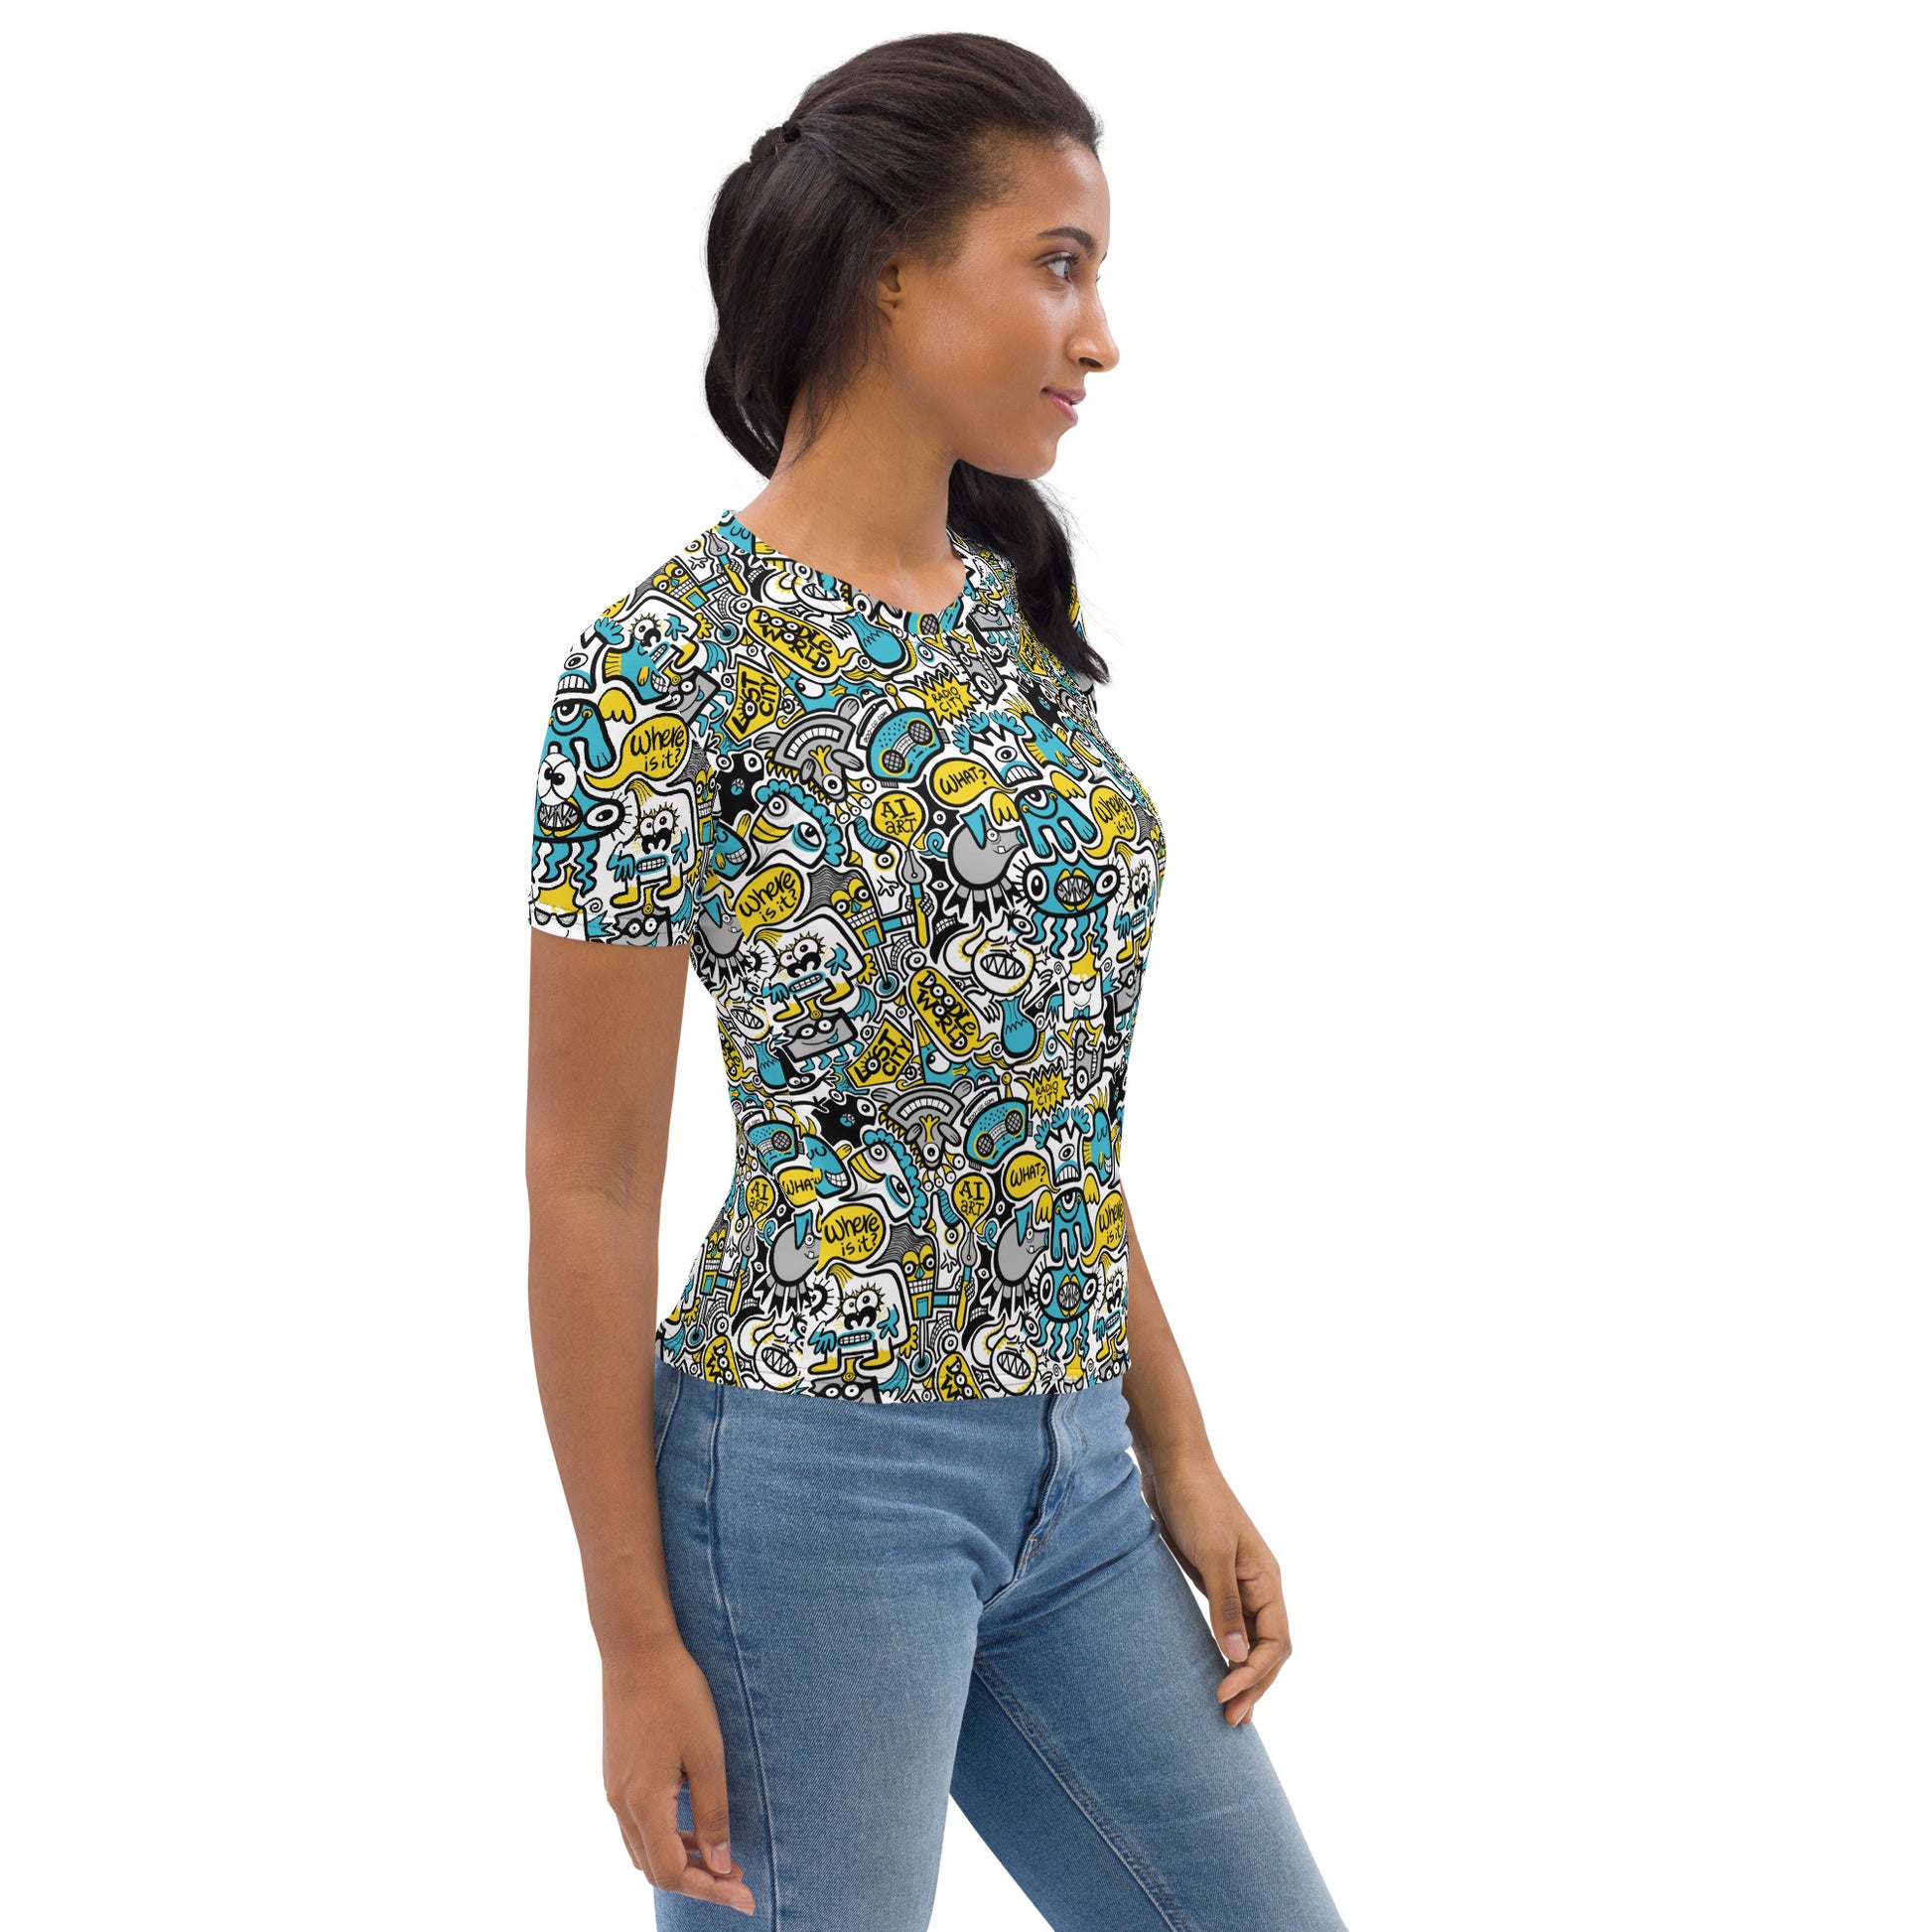 Discover a whole Doodle world in Lost city All-over print Women's T-shirt. Side view